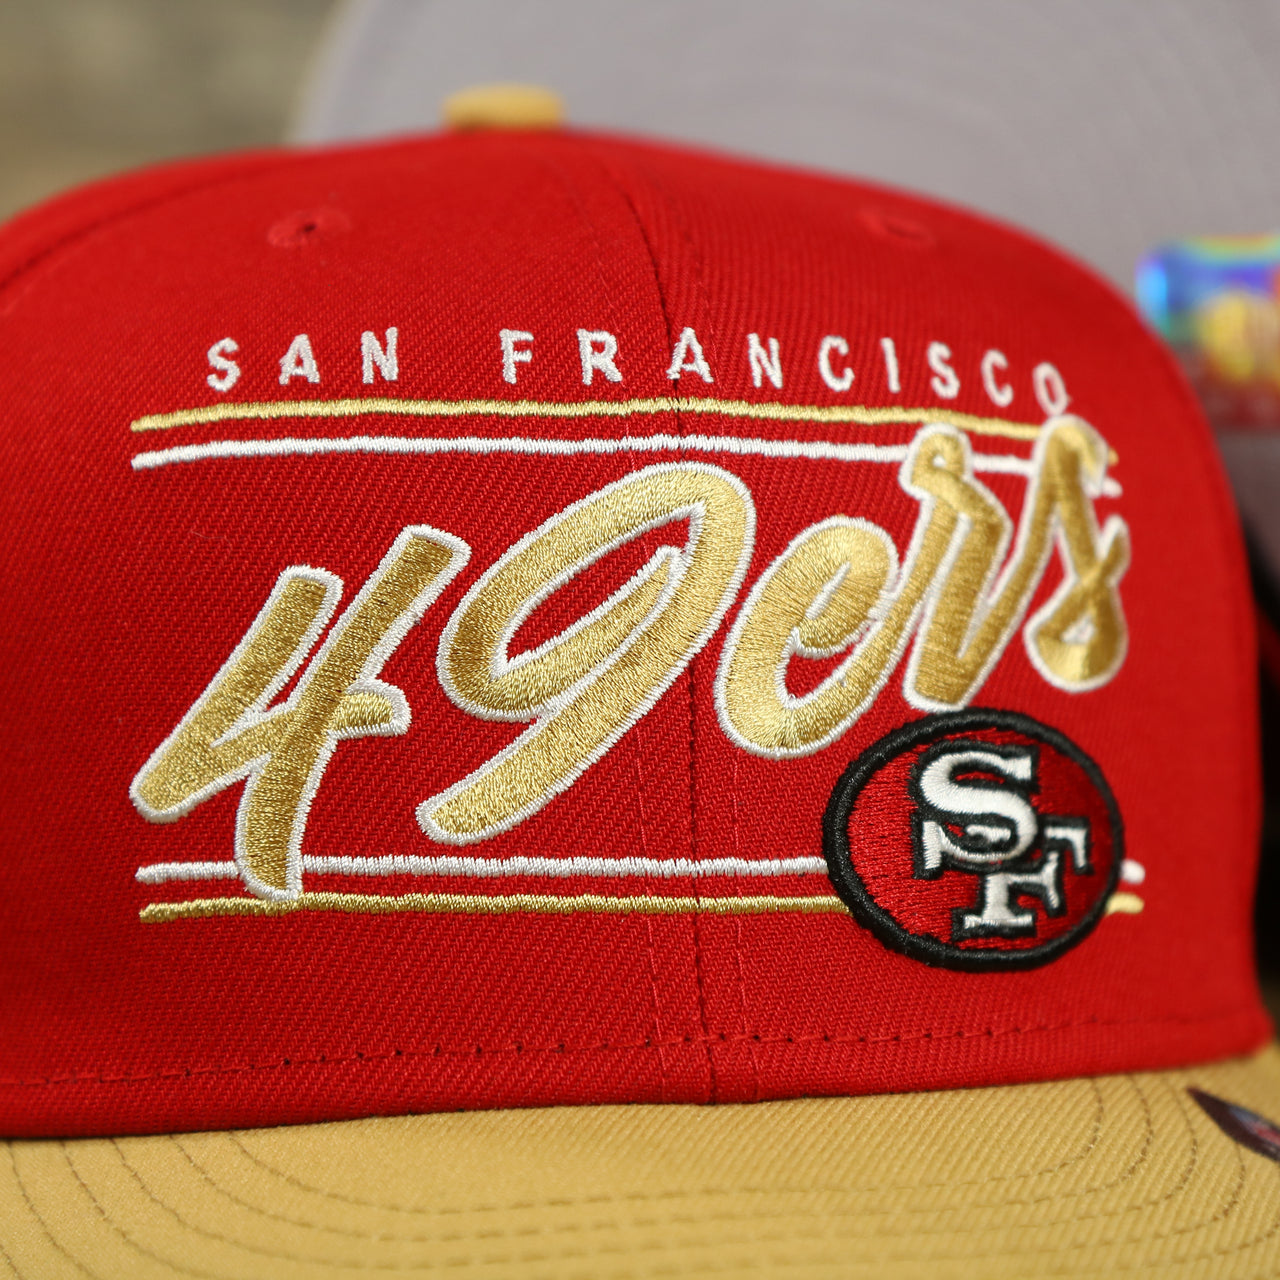 49ers logo on the San Francisco 49ers Team Script College Bar 9Fifty Snapback Hat | Red/Tan 49ers 950 Snap Cap